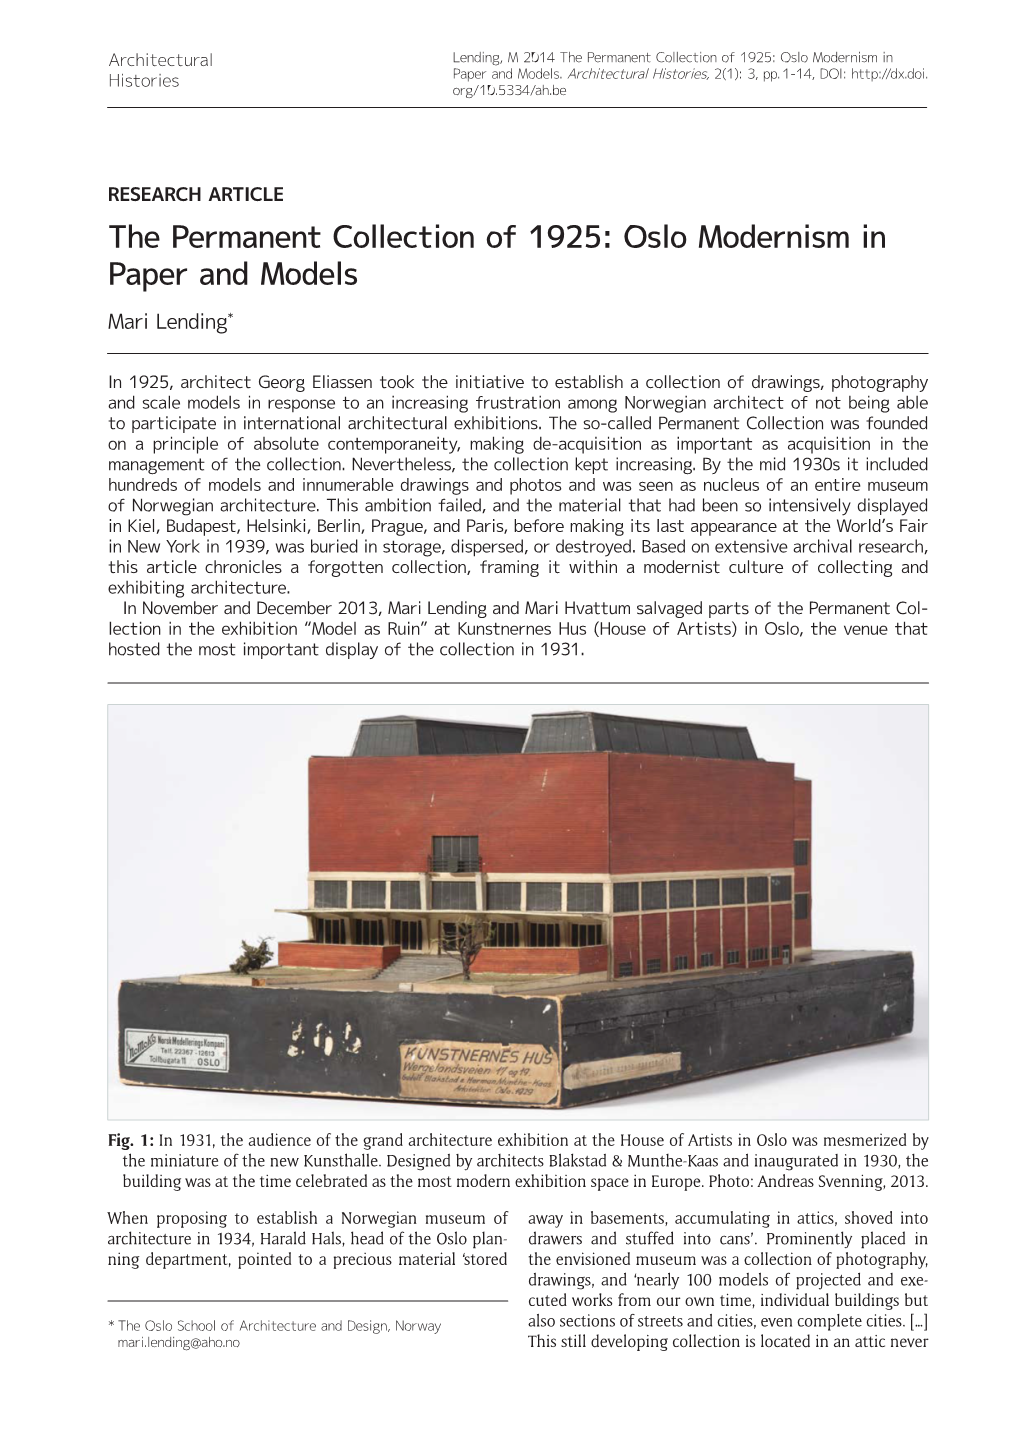 The Permanent Collection of 1925: Oslo Modernism in Paper and Models Mari Lending*